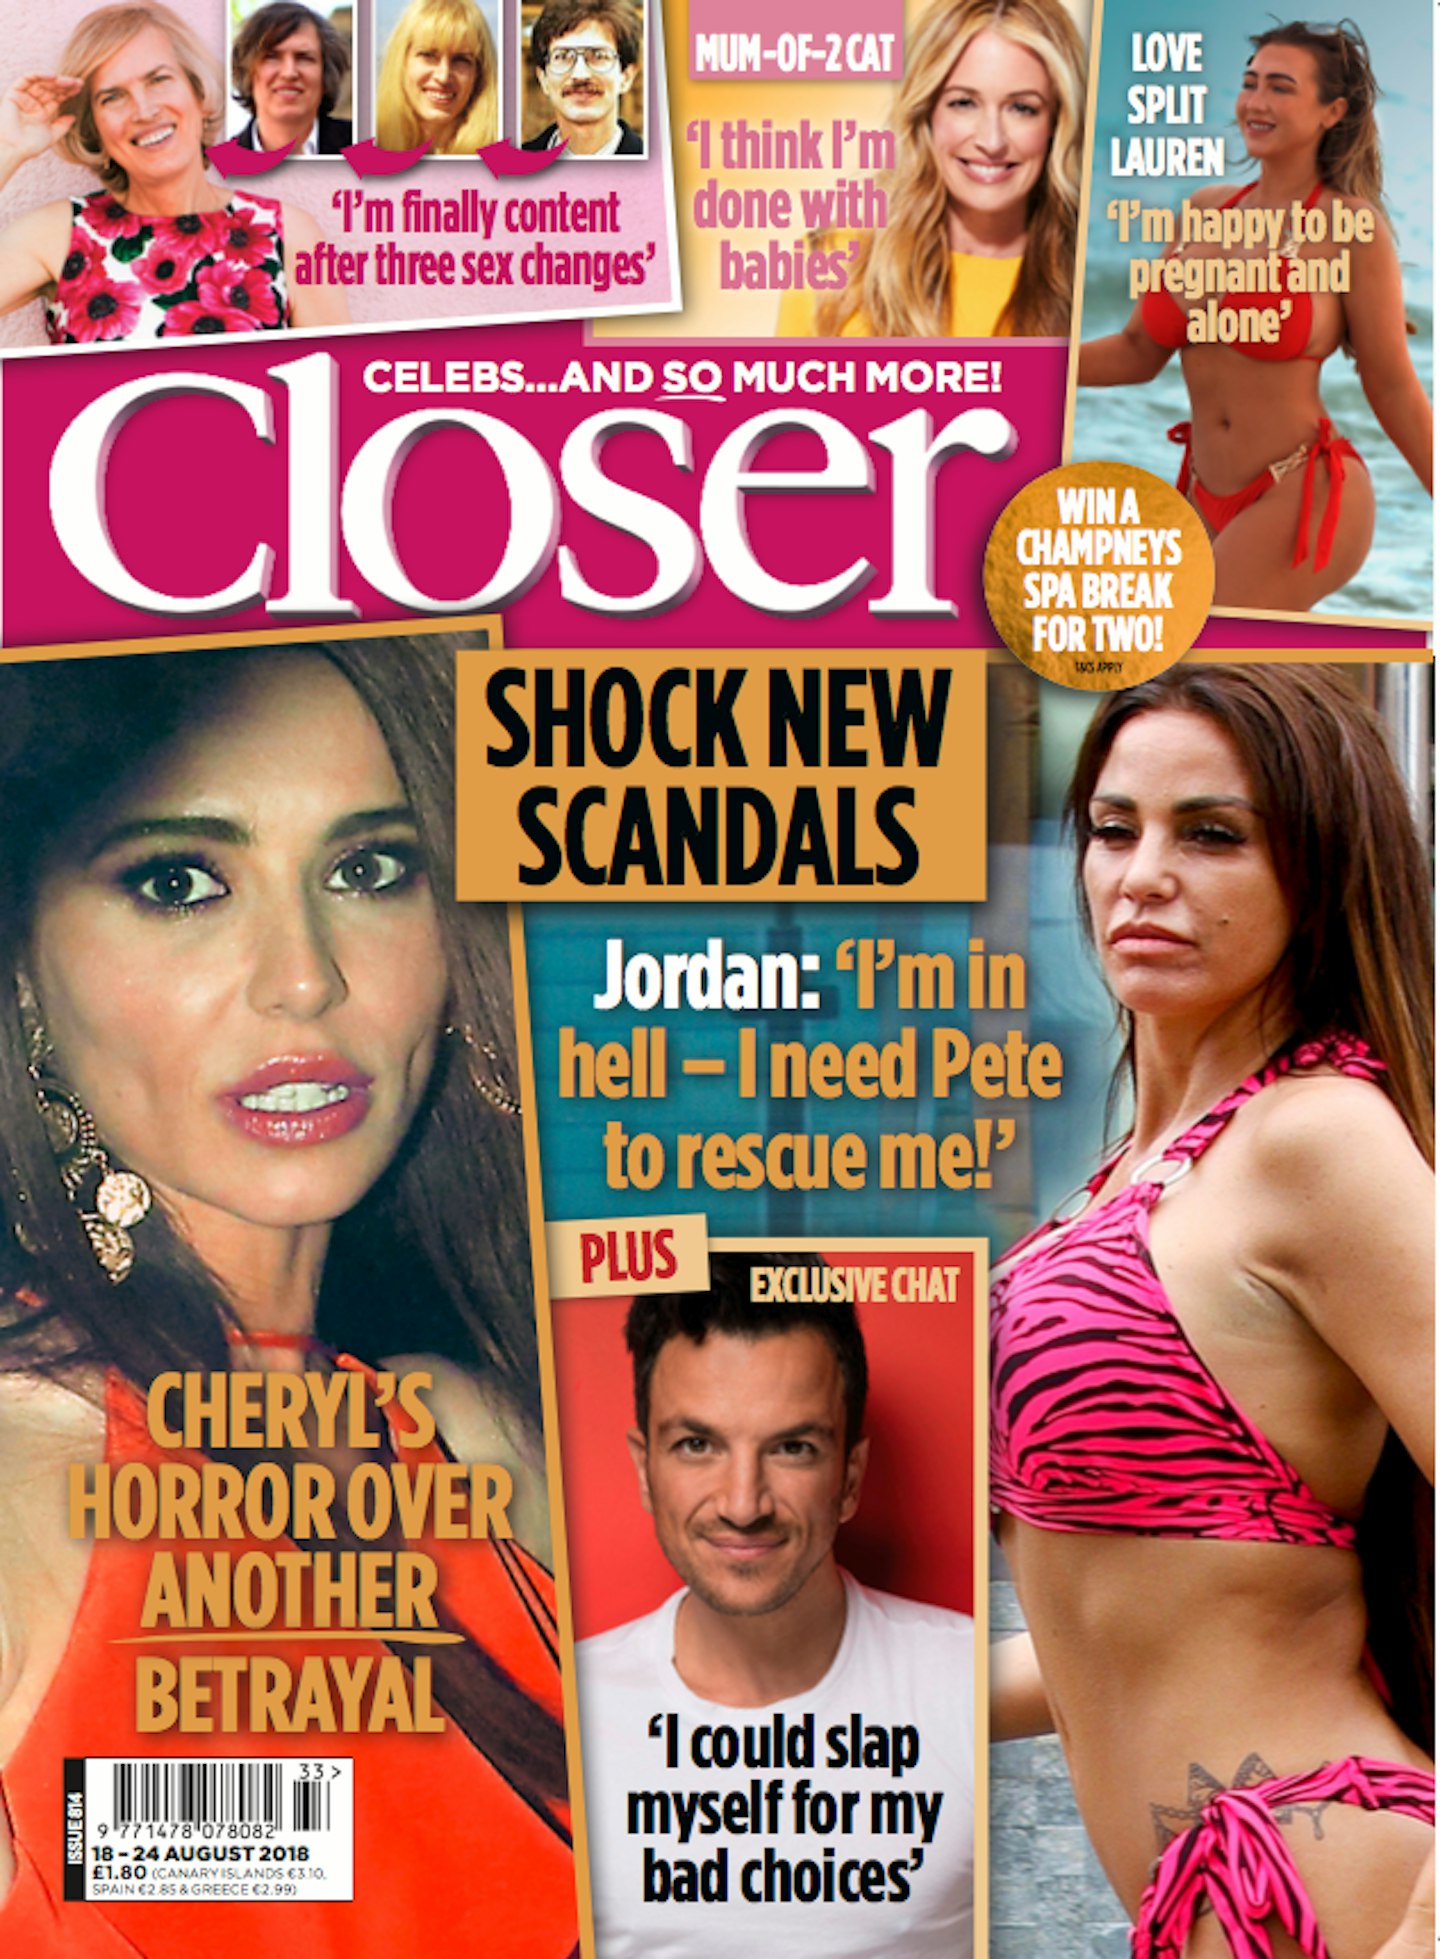 Closer issue 814 August 2018